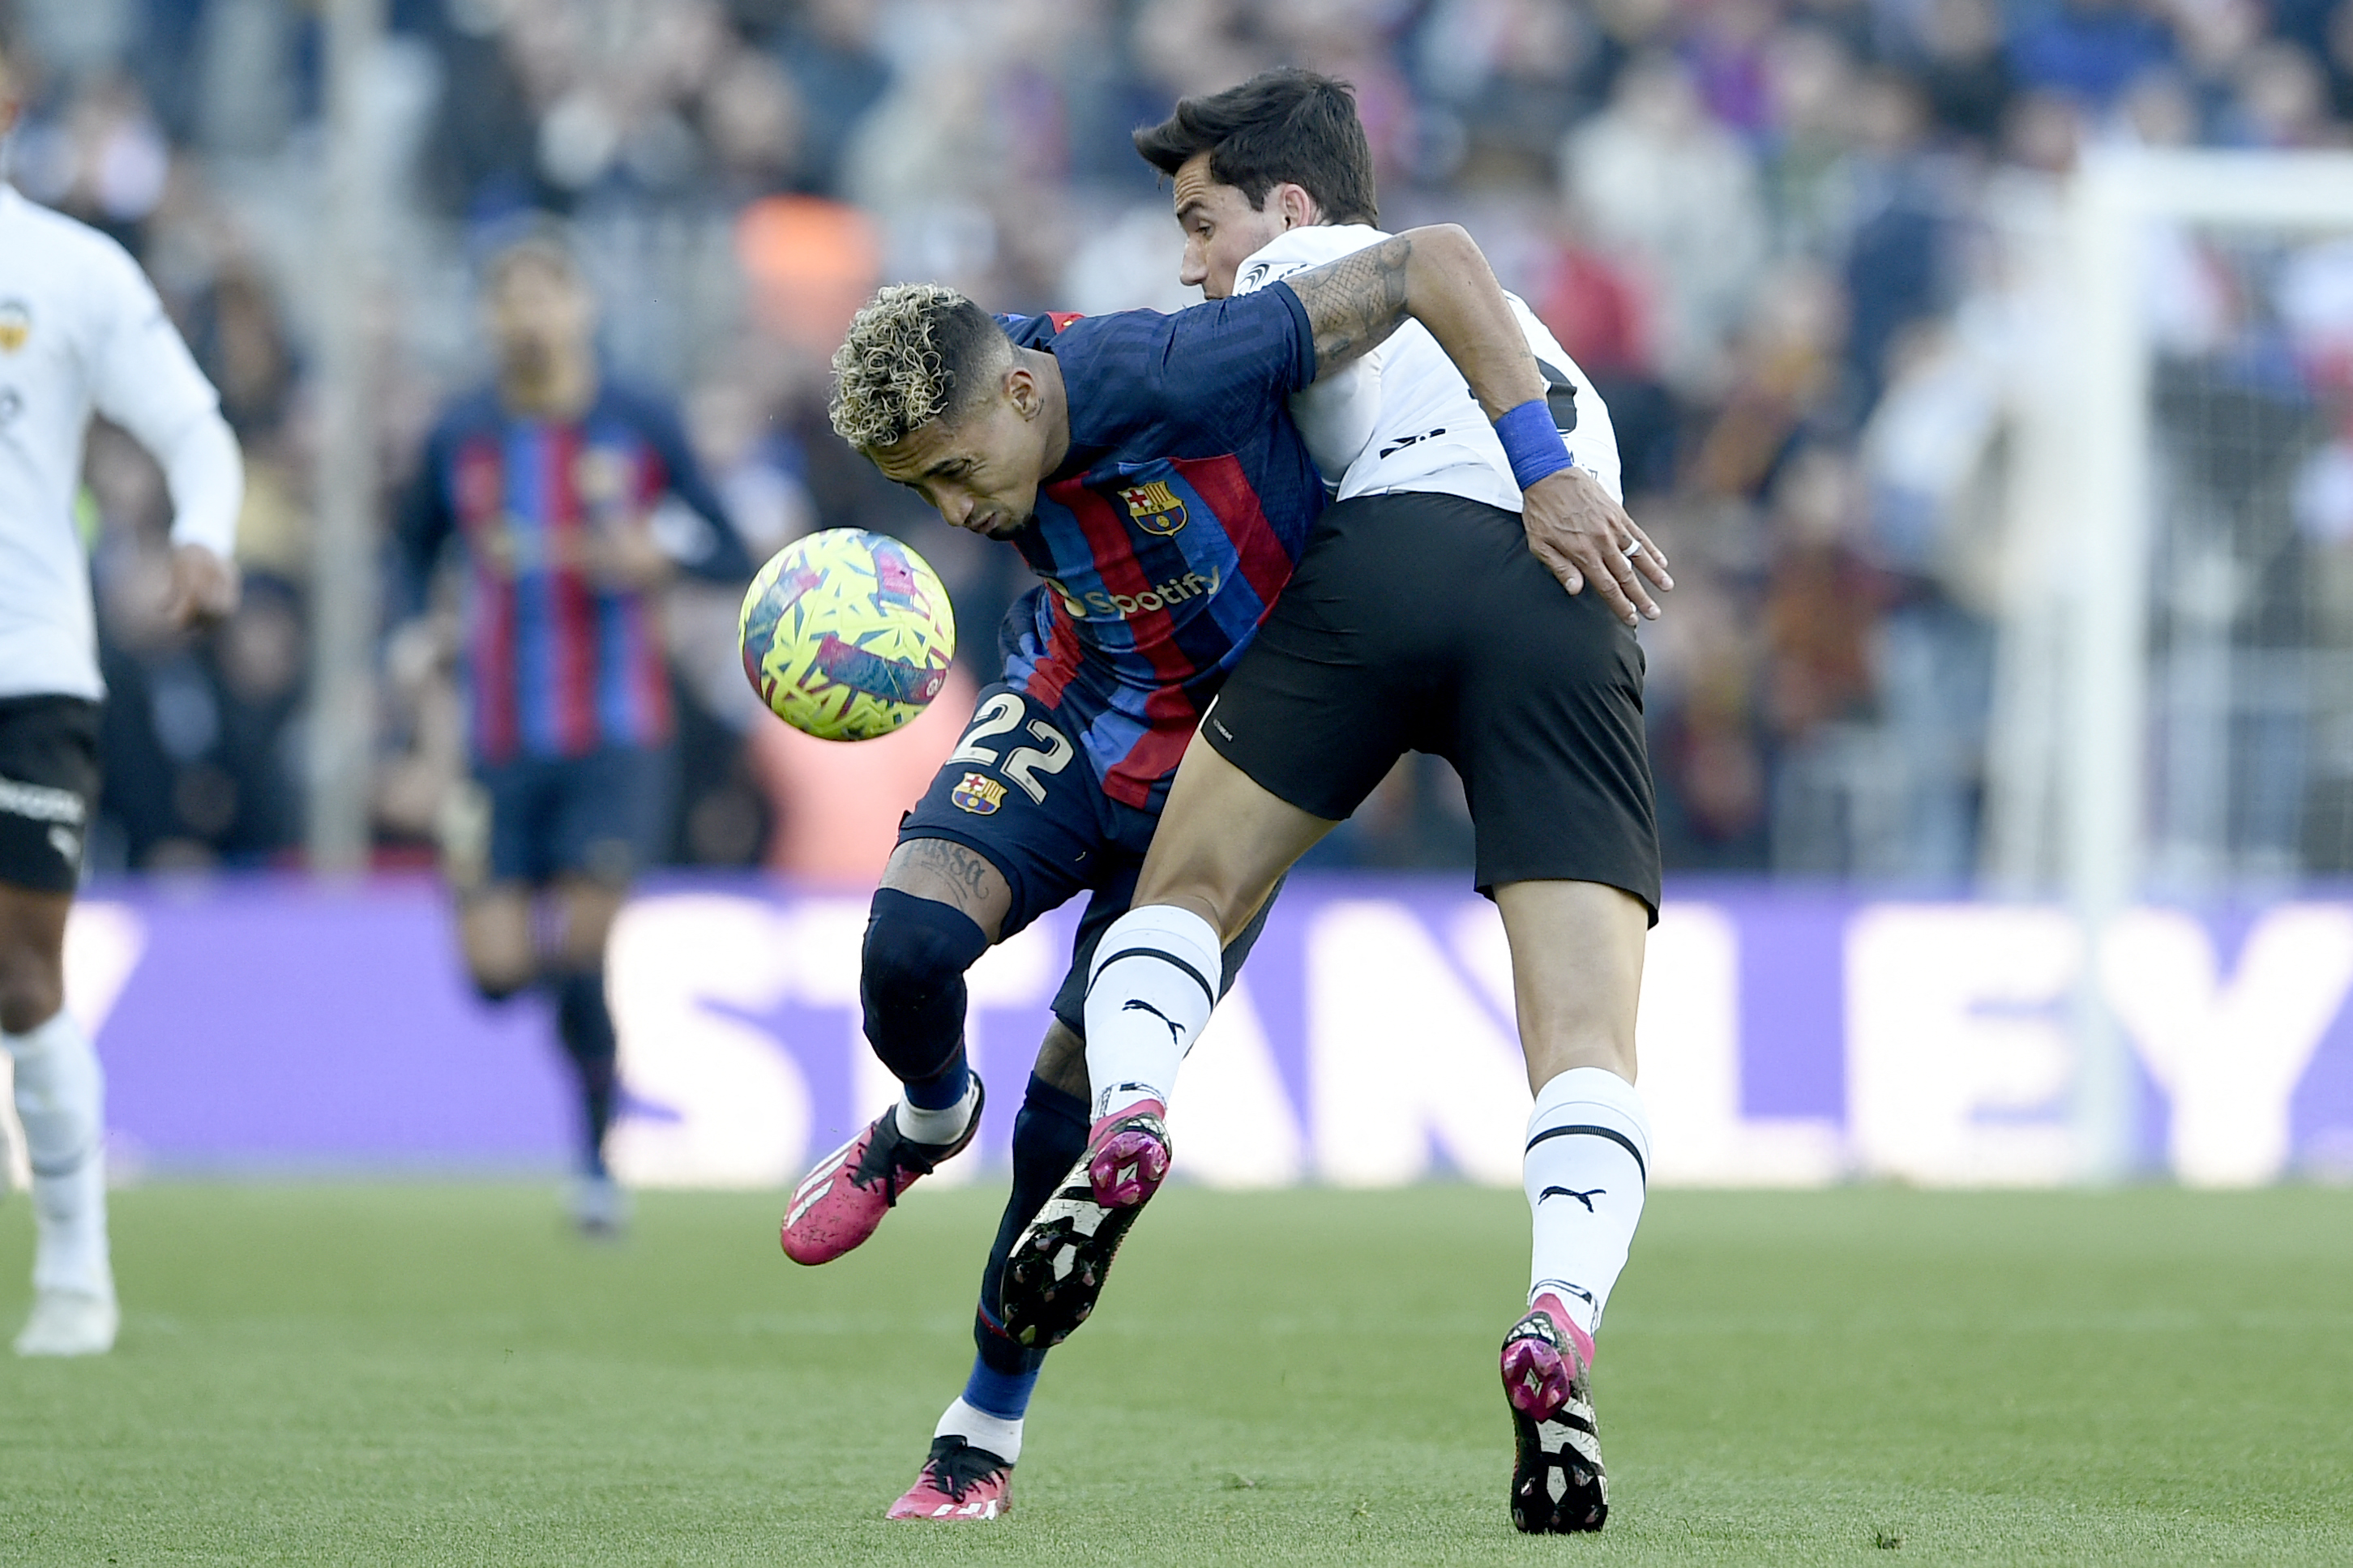 Raphinha and Guillamón dispute for the ball on matchday 24 of the League.